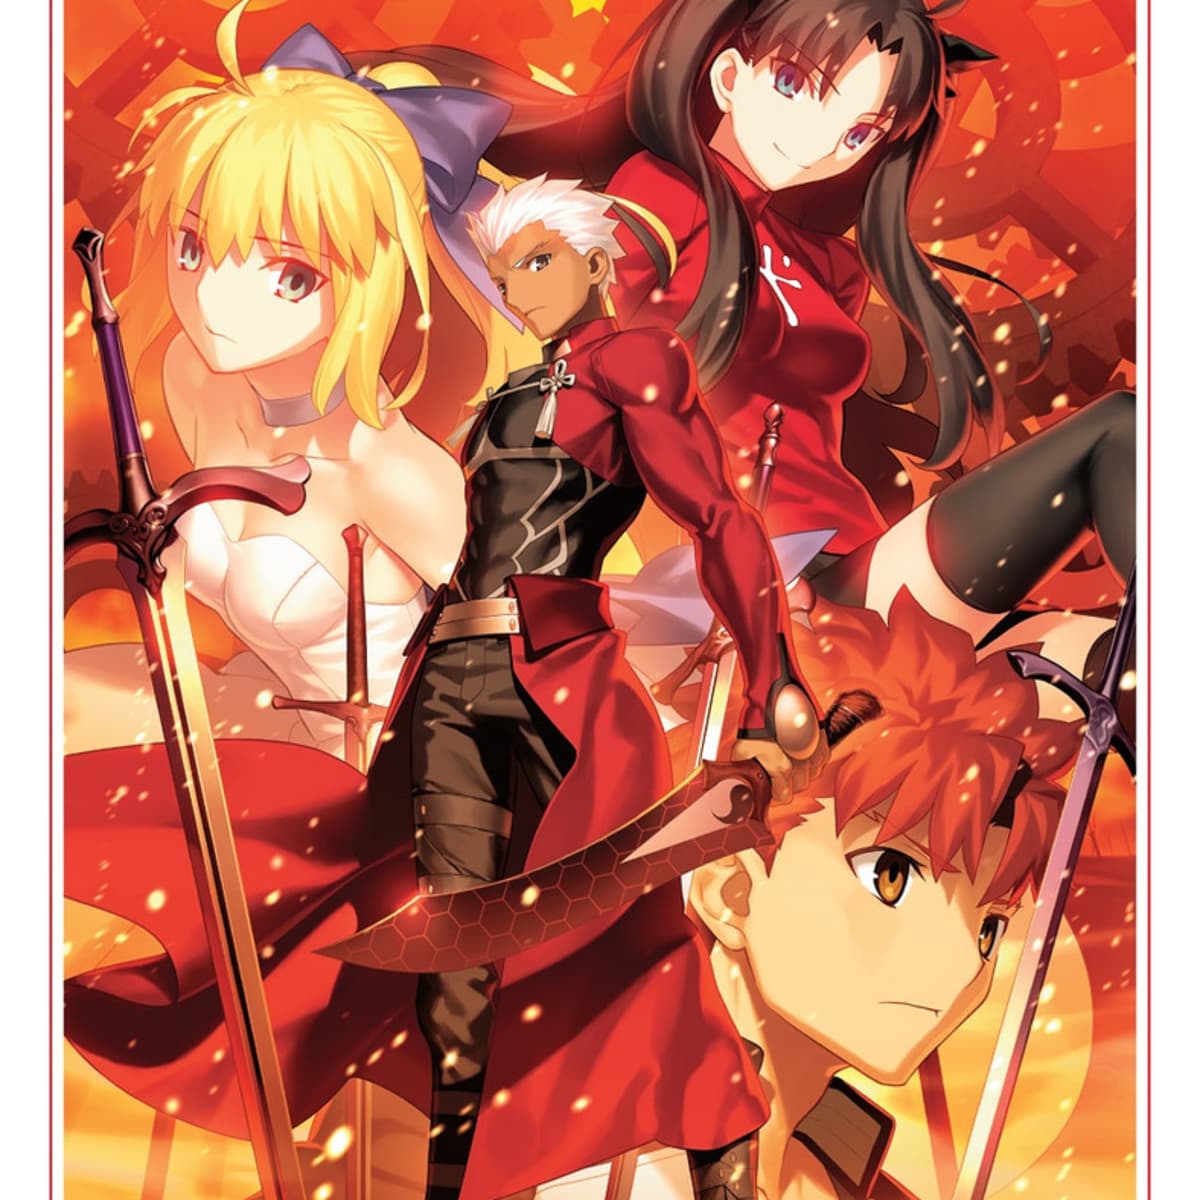 Fate/stay night: Unlimited Blade Works Manga Celebrates 1st Volume With PV